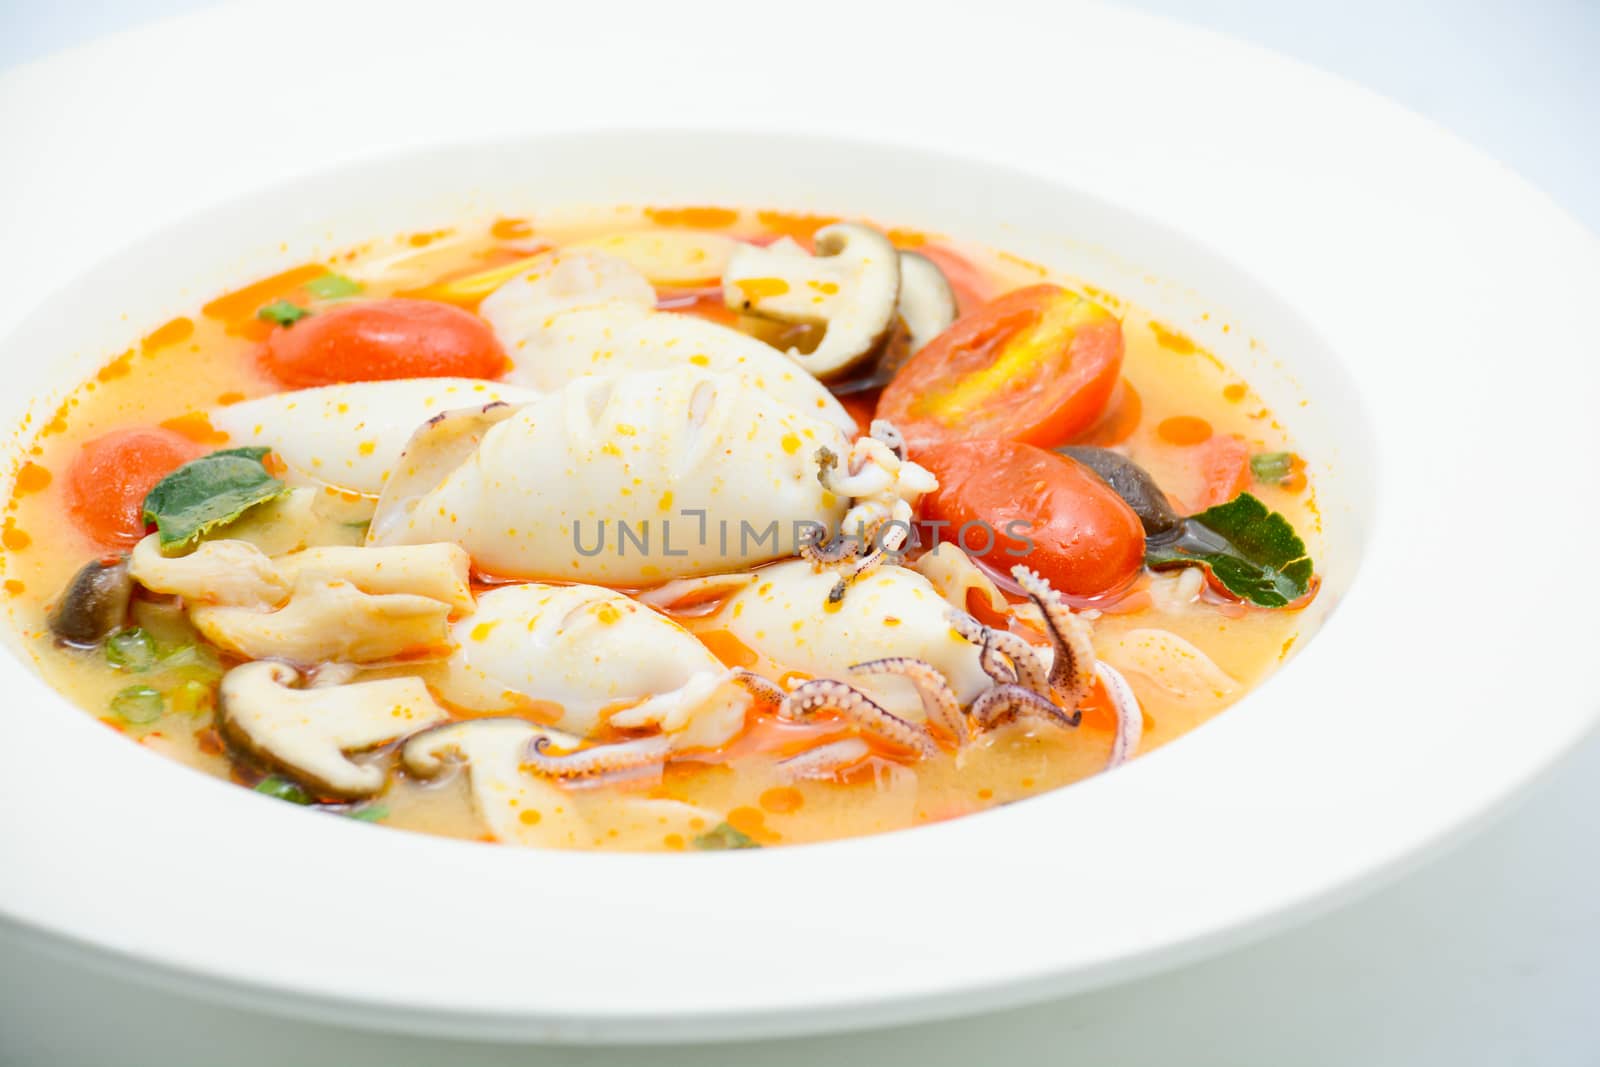 Squids and lemon grass spicy soup with mushrooms, tomatoes and herbs